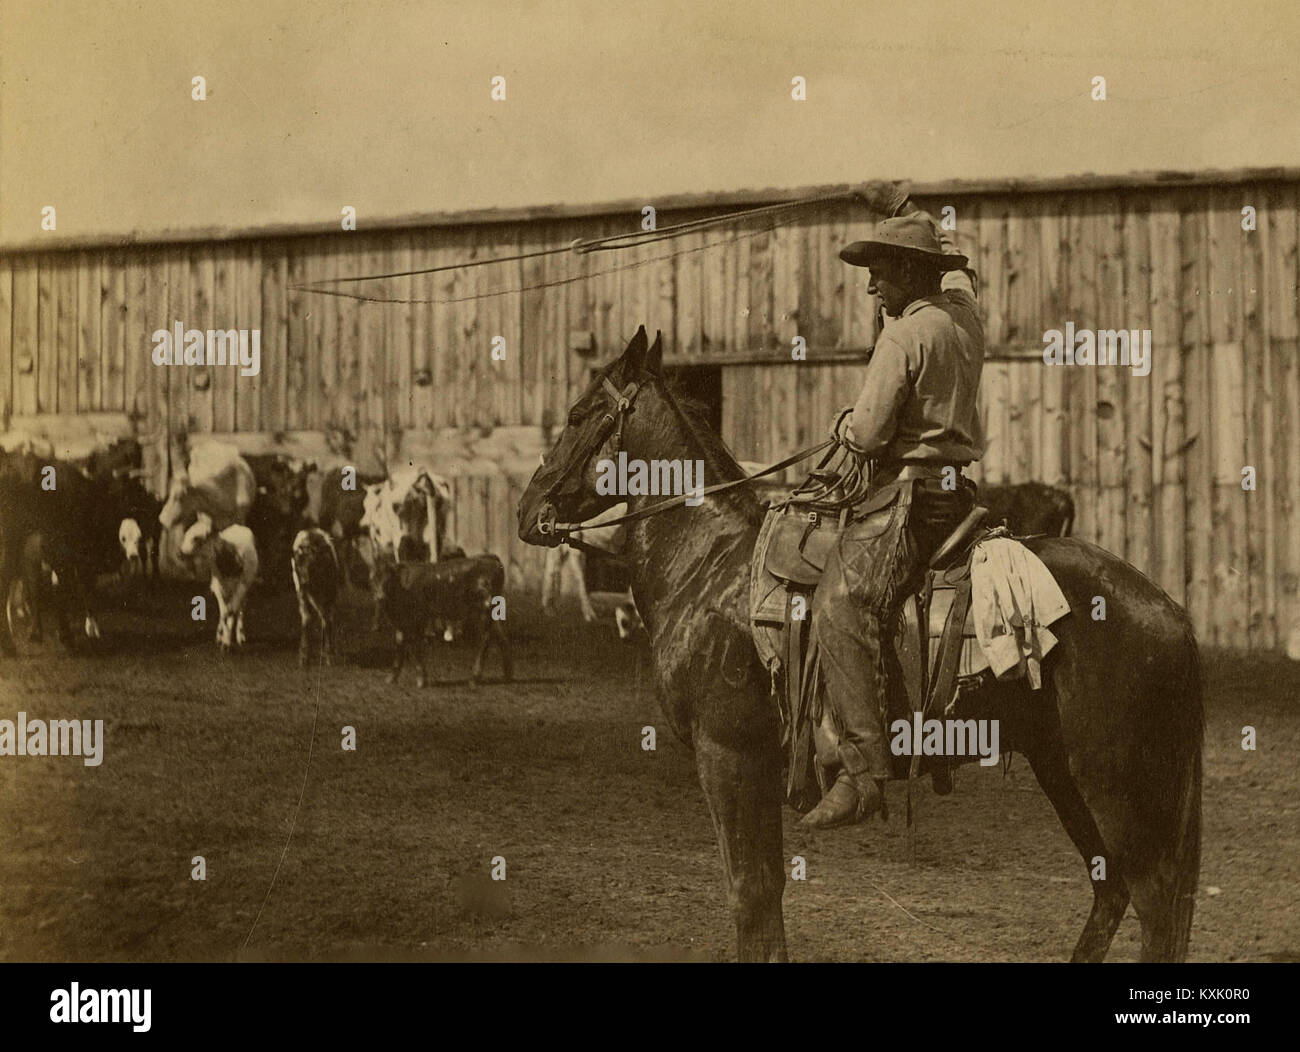 William Henry Jackson "In The Corral. The Lariat" Stock Photo